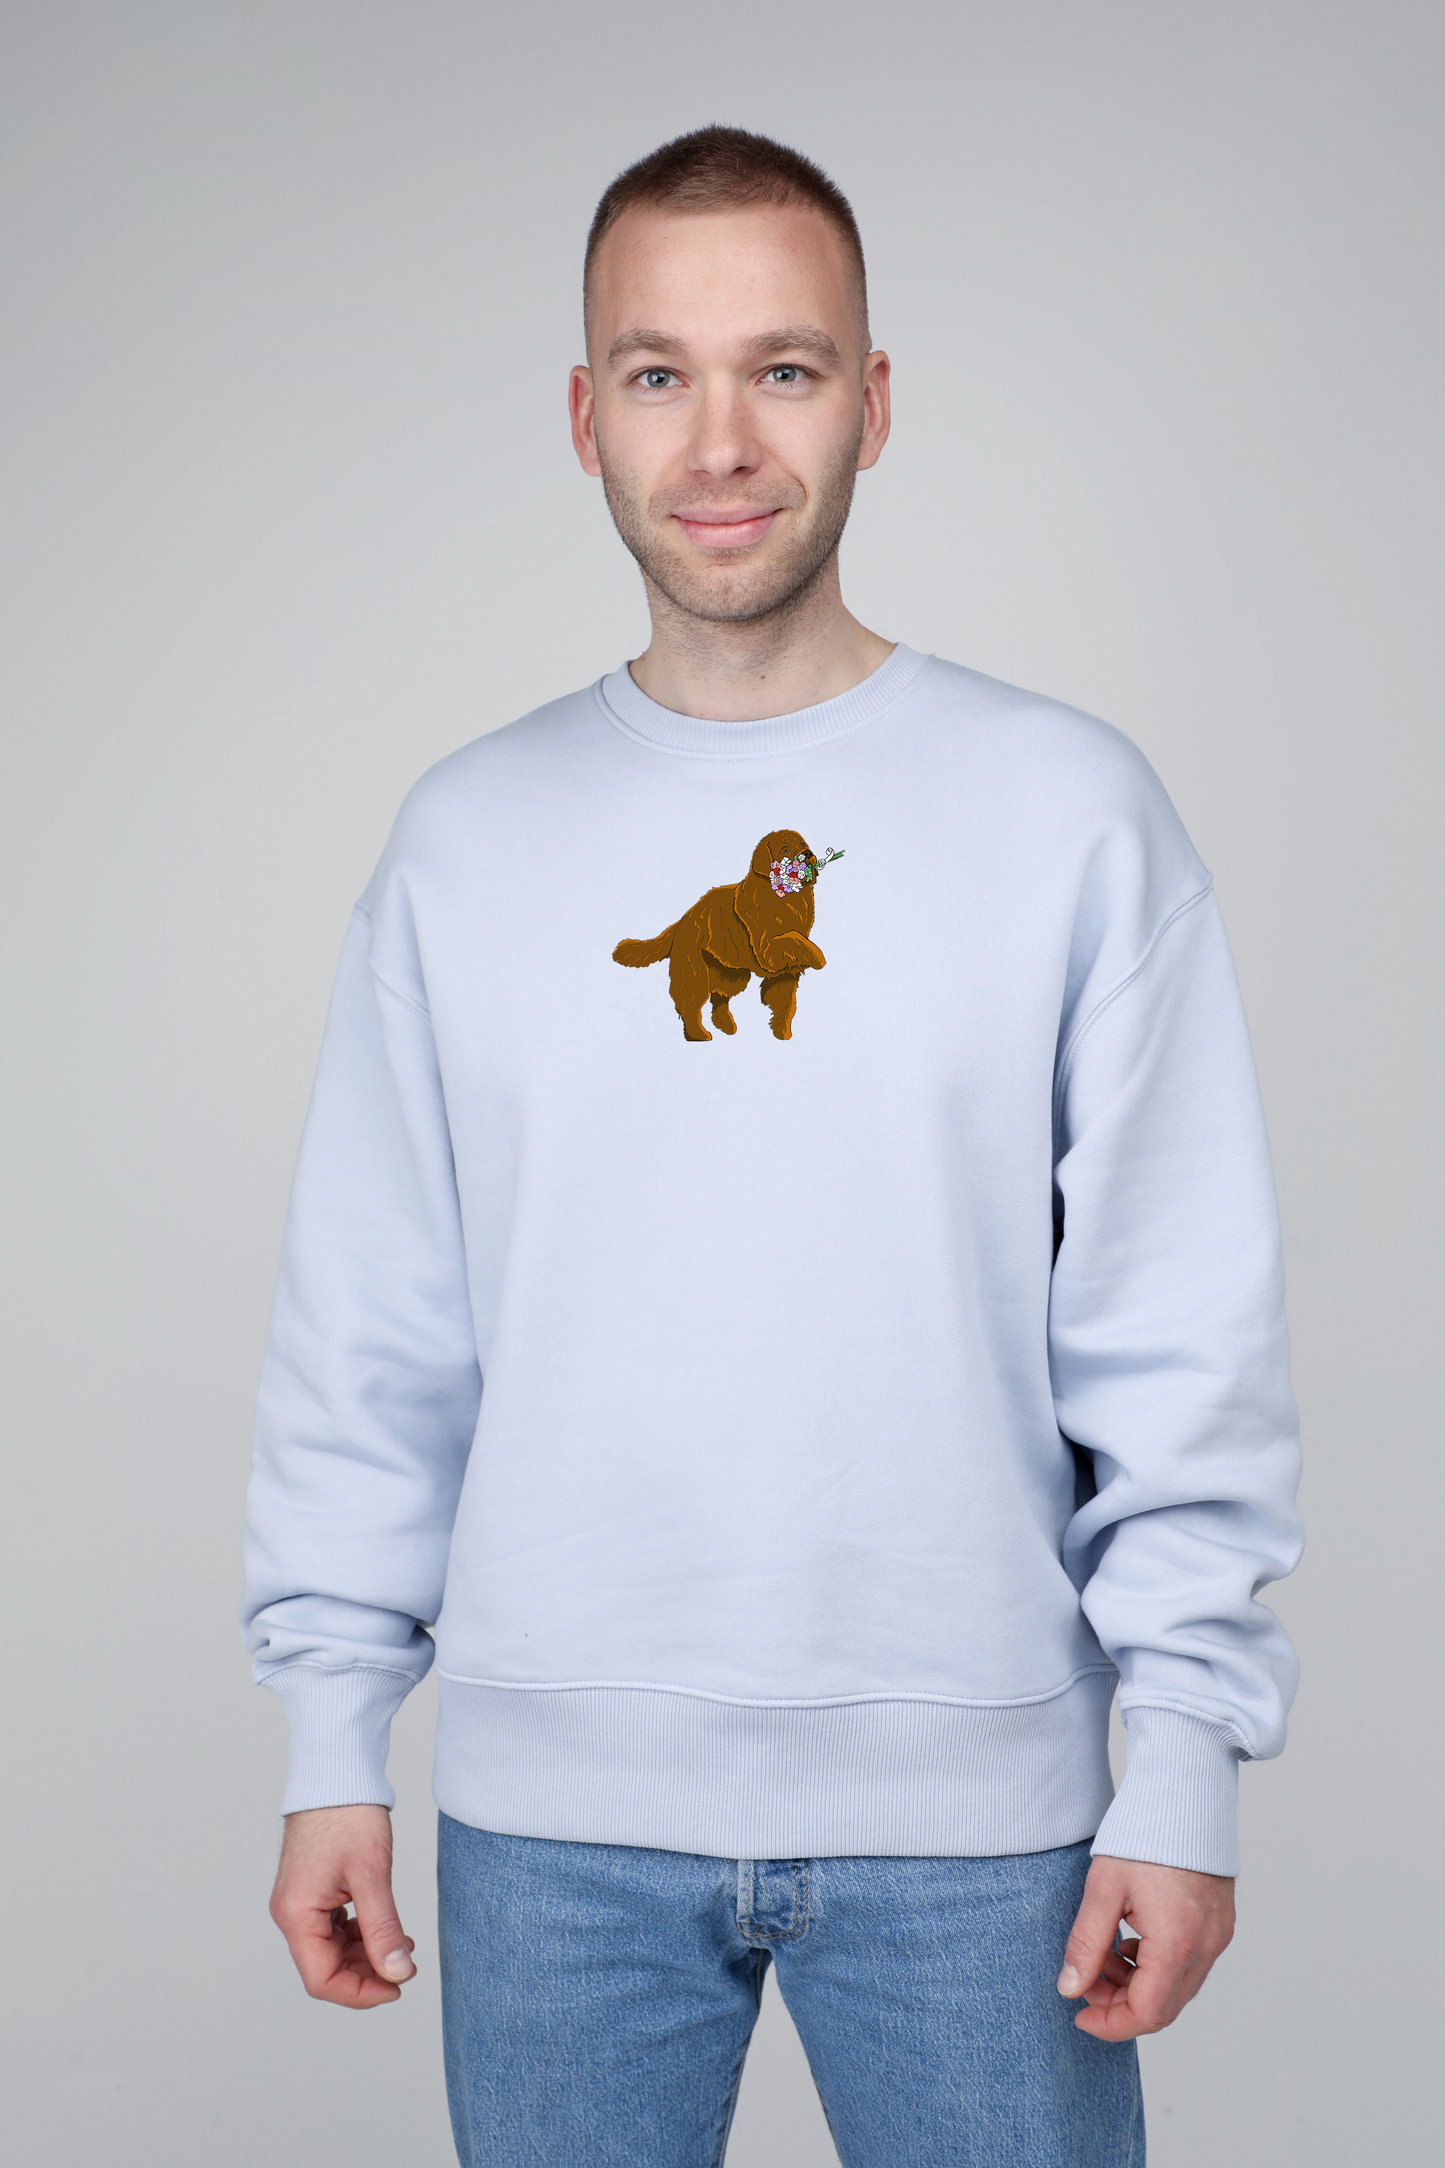 Giant dog with flowers | Crew neck sweatshirt with dog. Oversize fit | Unisex by My Wild Other